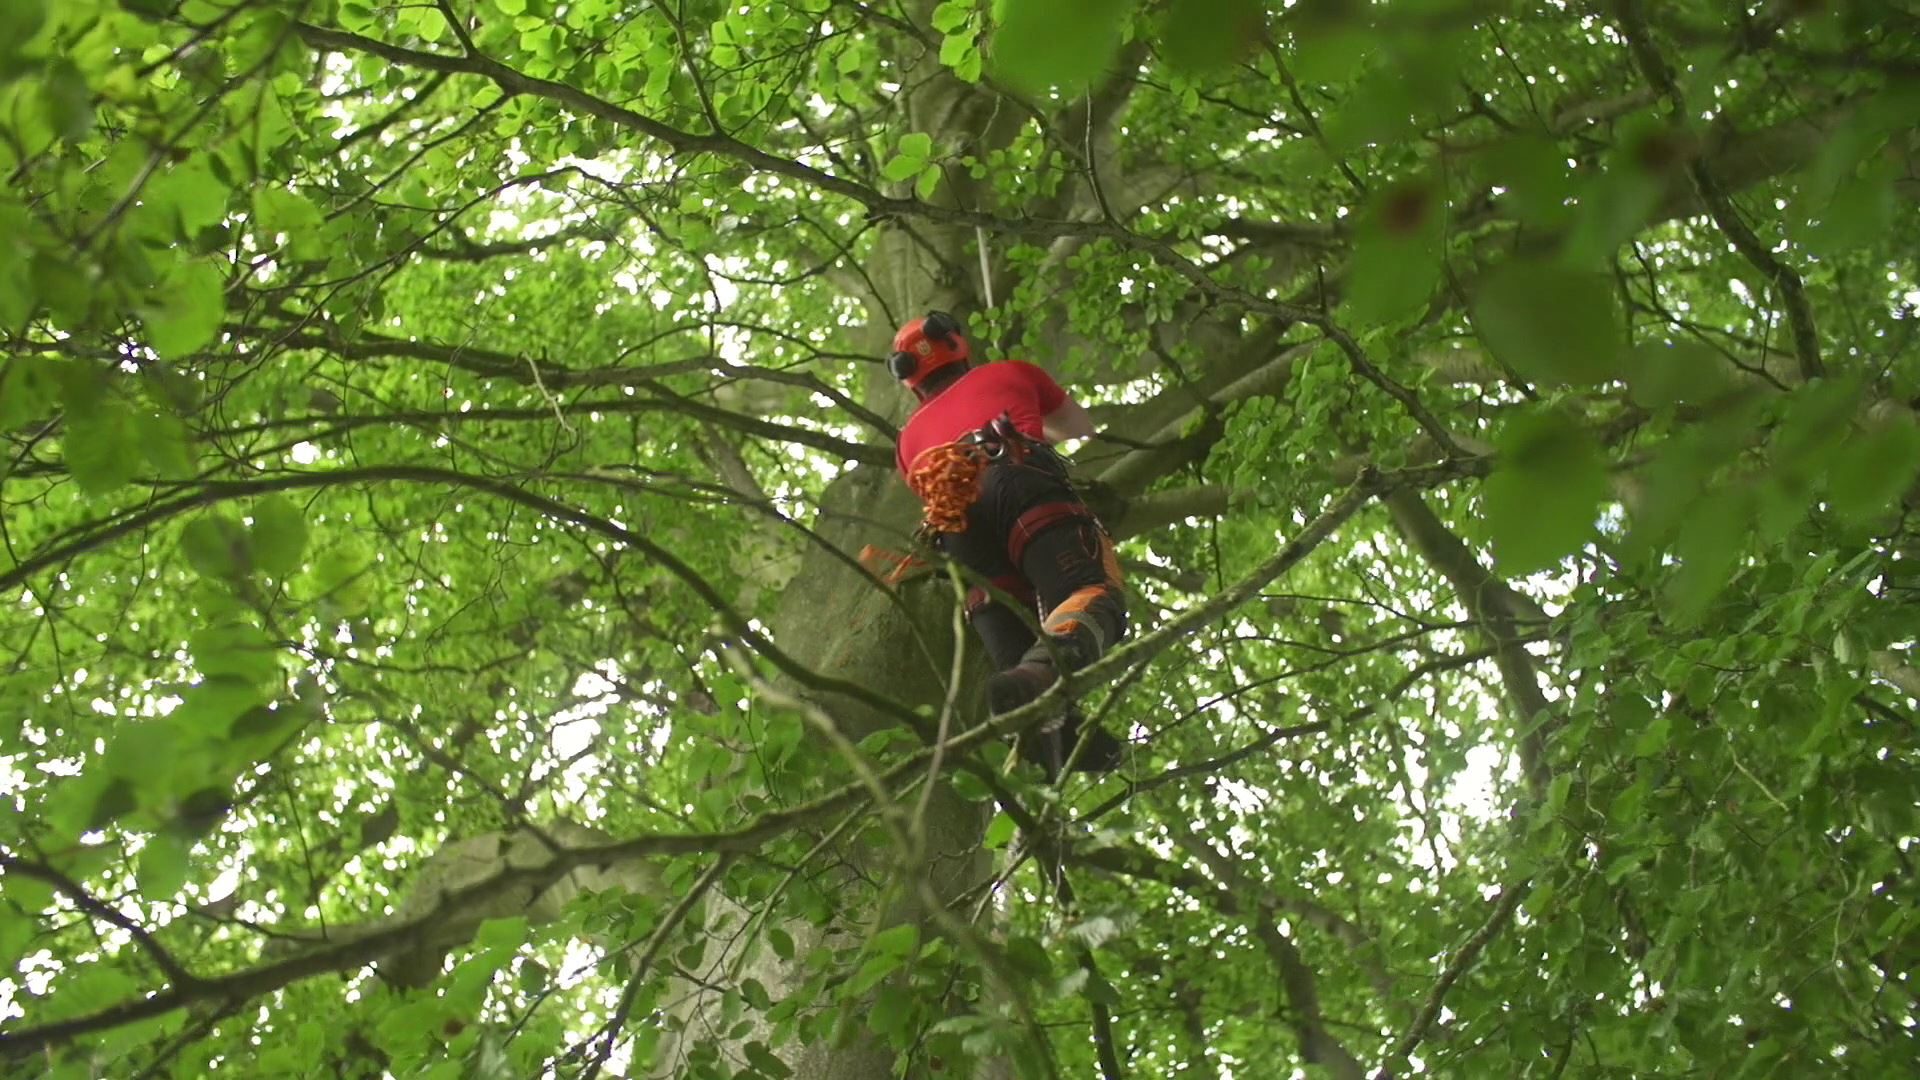 What Does a Tree Surgeon Do?